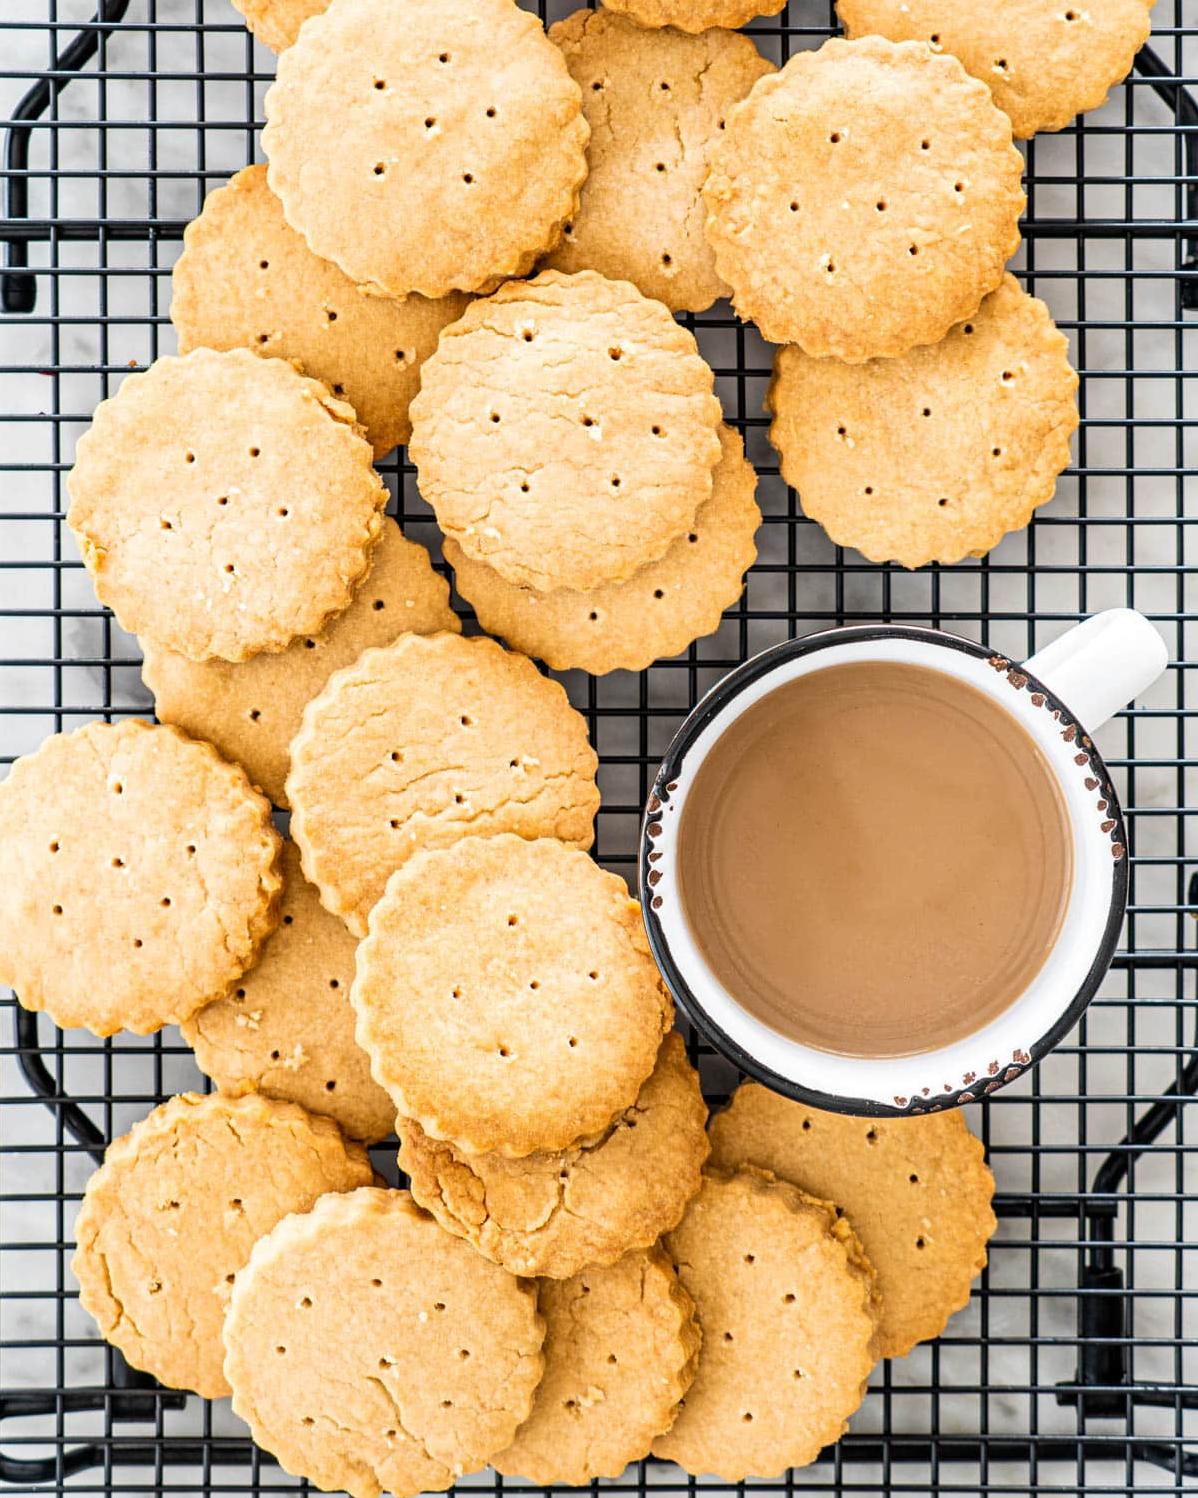  This Scottish Shortbread will have you dreaming of green grassy hills and misty mornings.